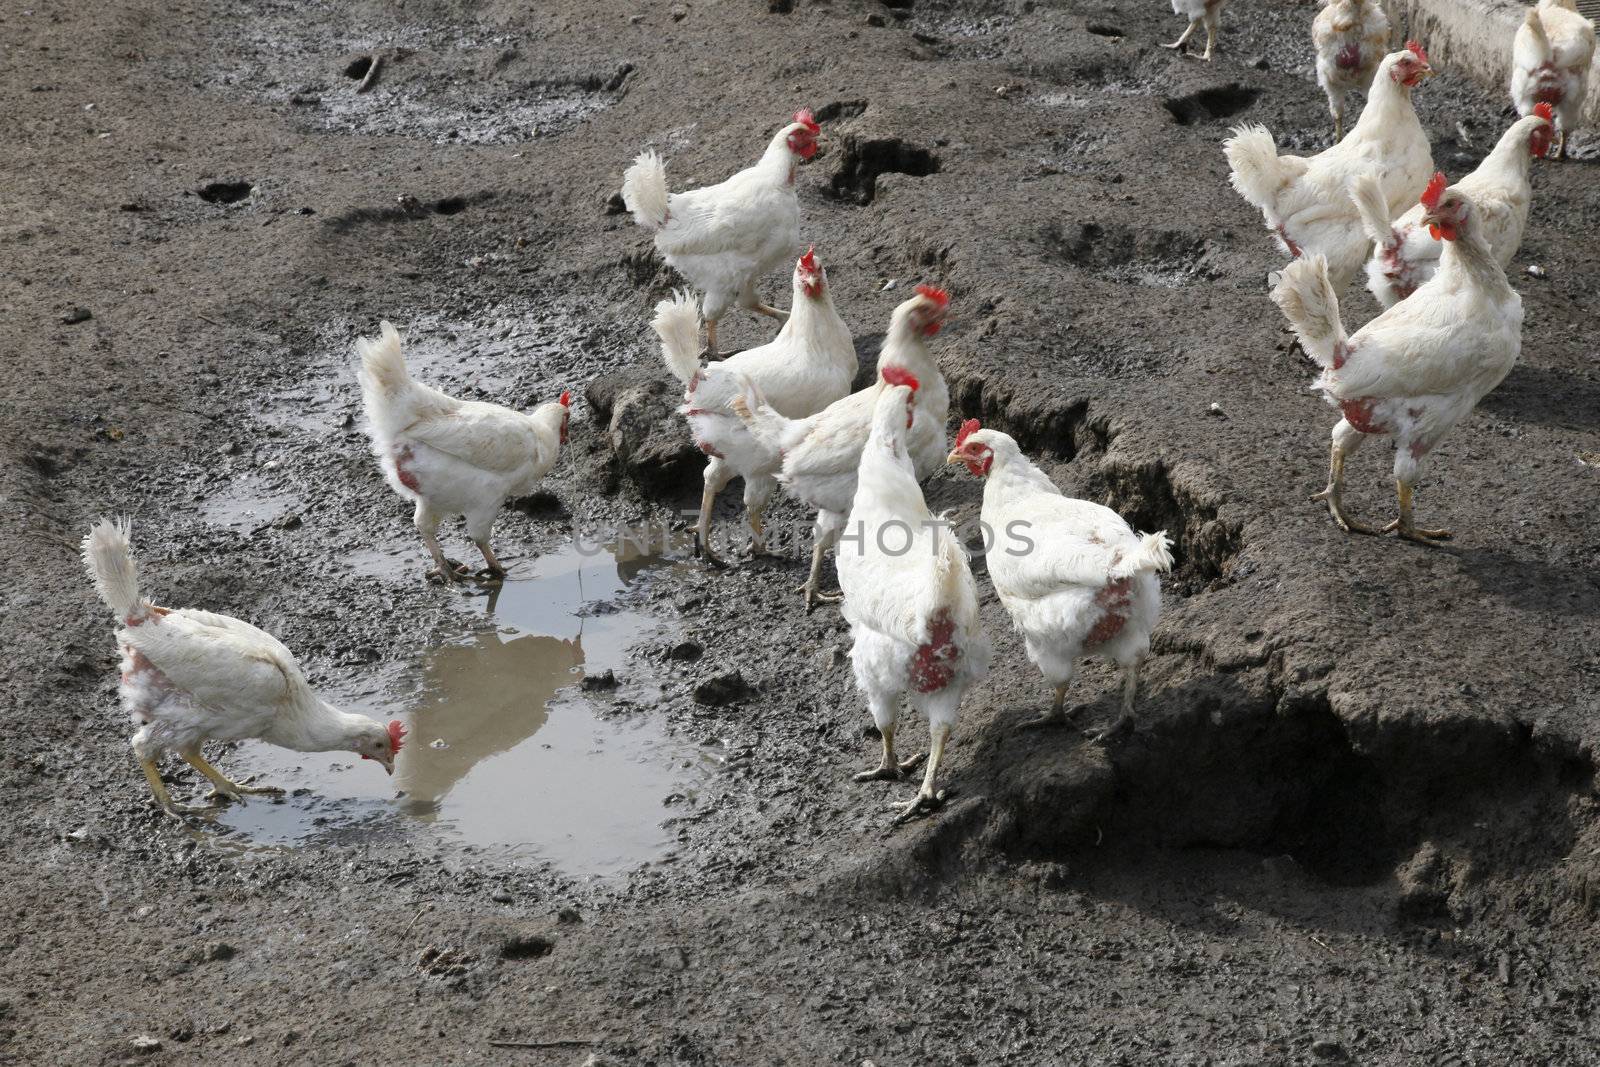 biological chickens in mud and puddle